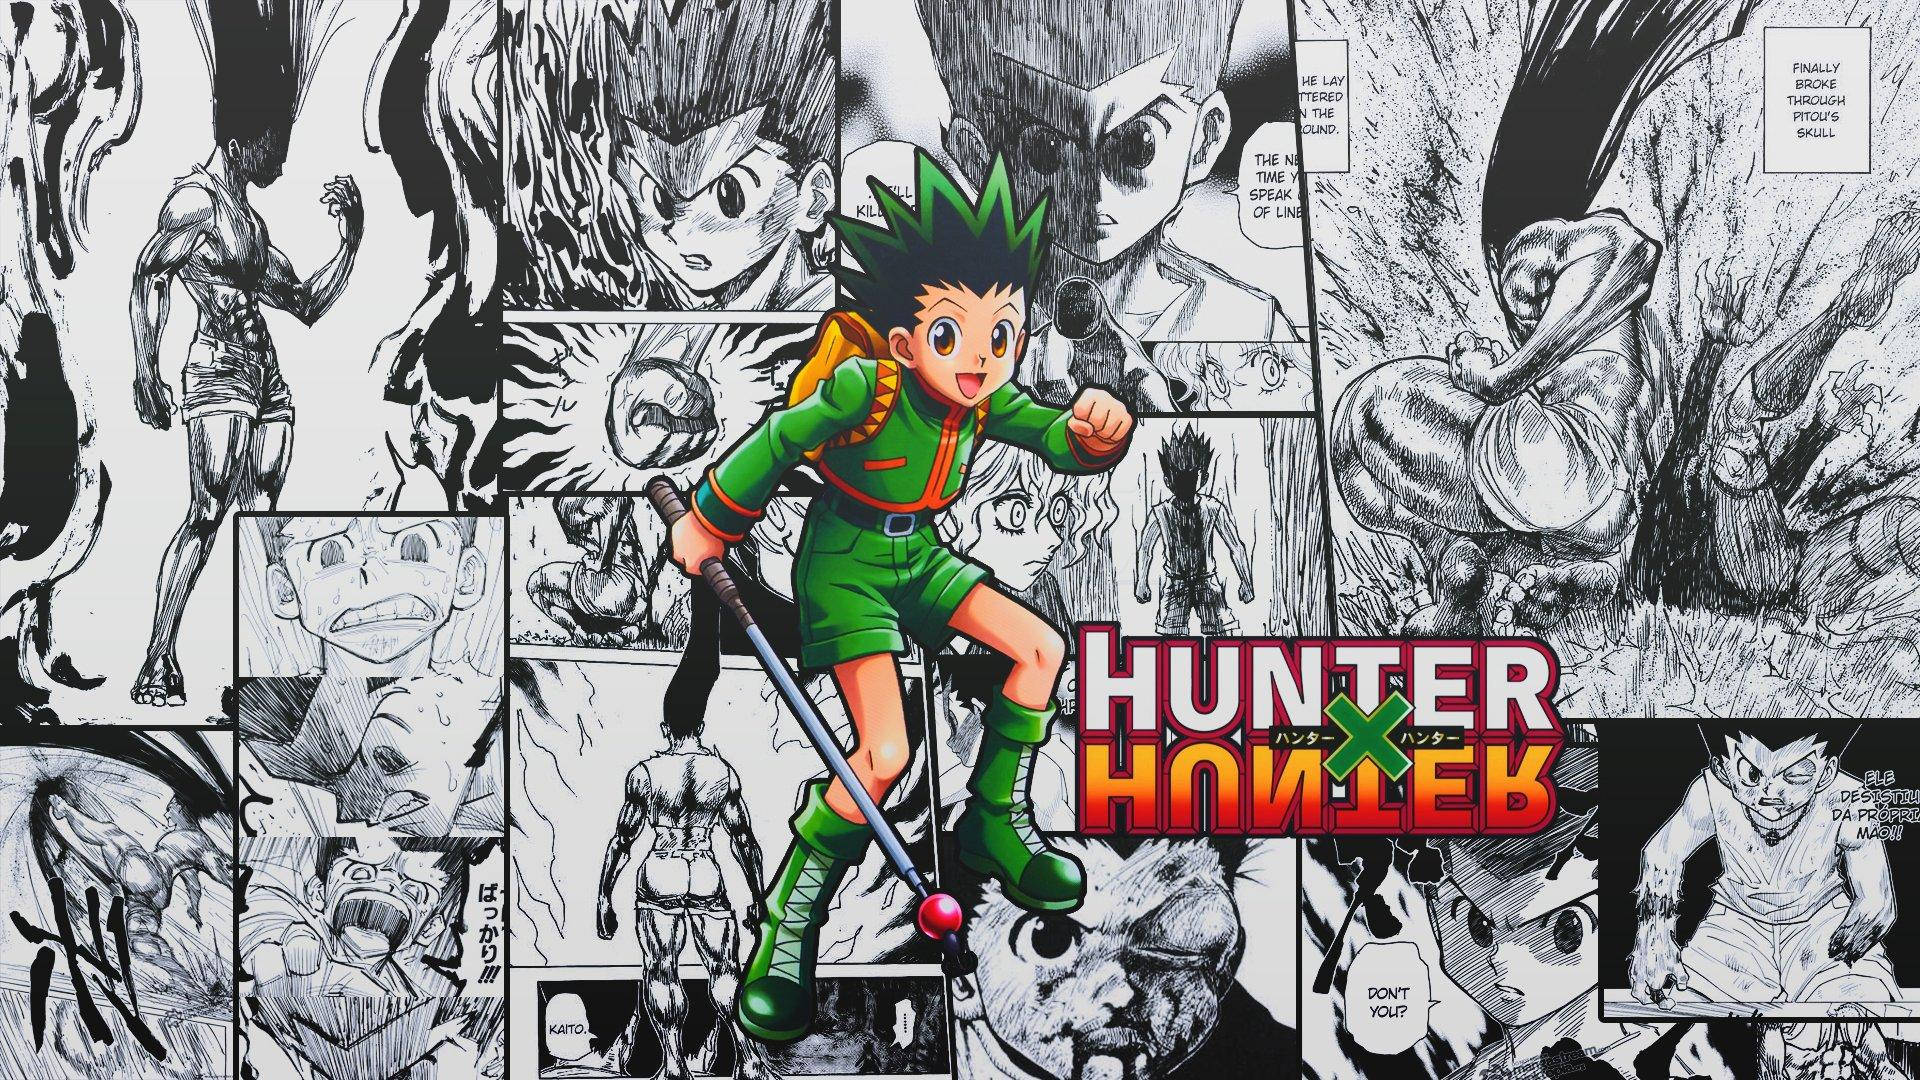 Gon Freecss on his mission for the Hunter Exam Wallpaper